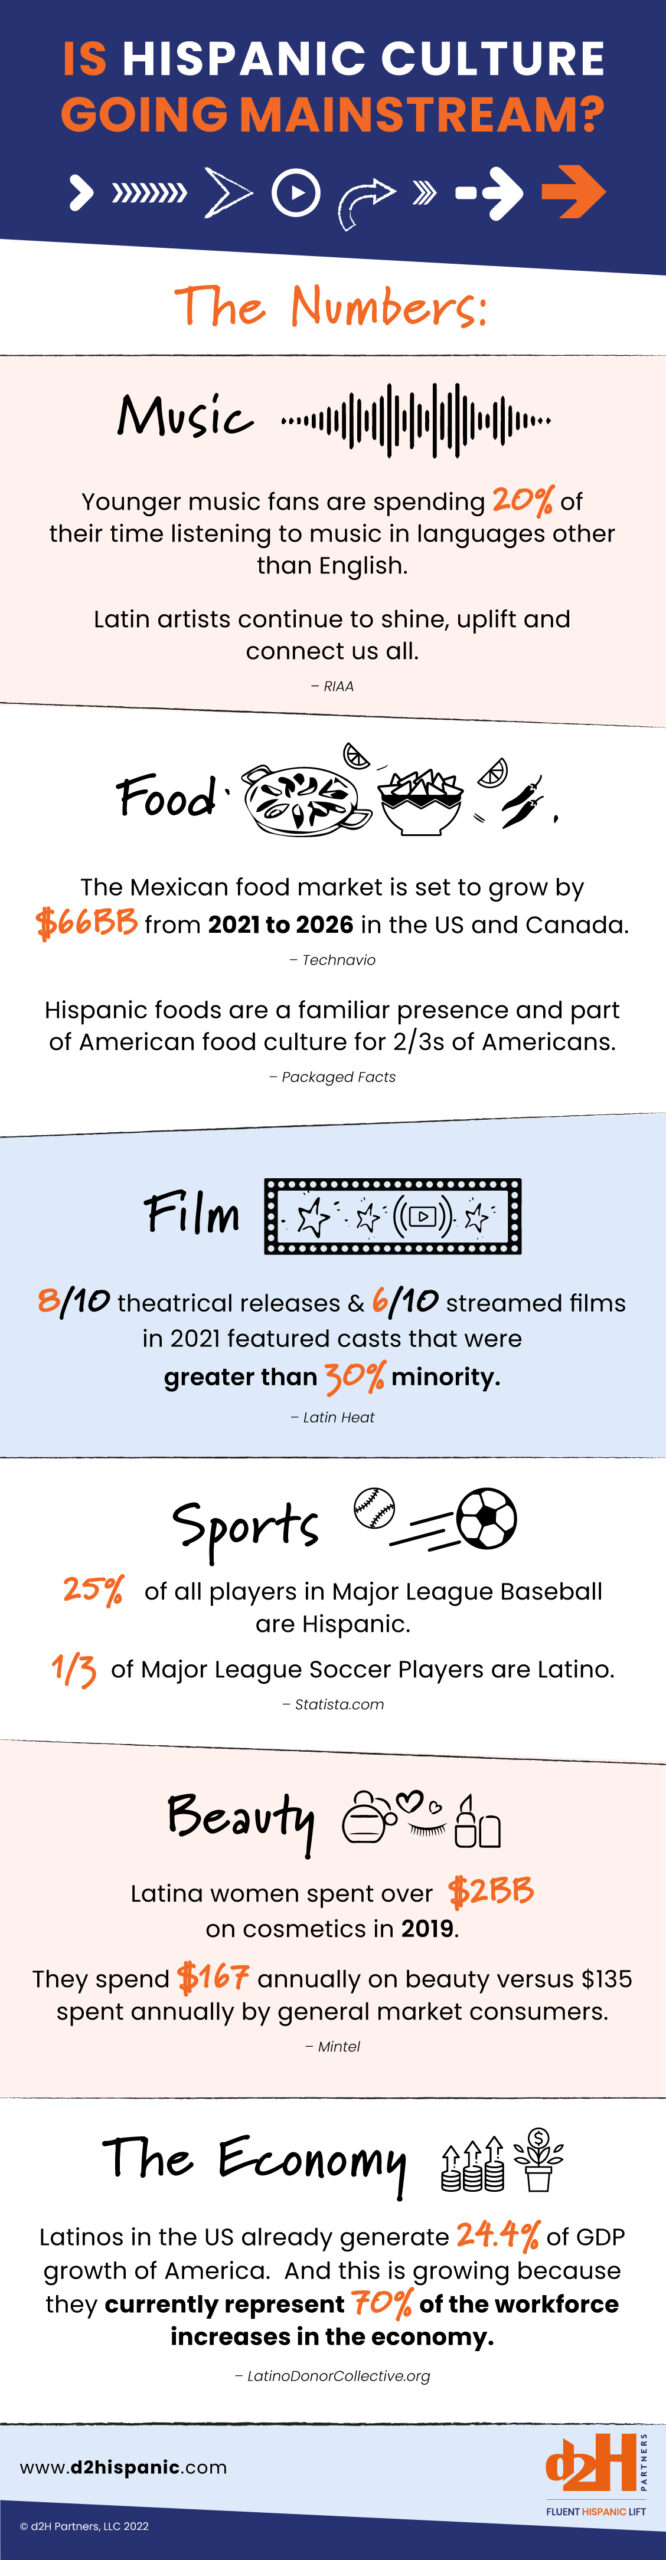 Is Hispanic Culture Going Mainstream - Infographic